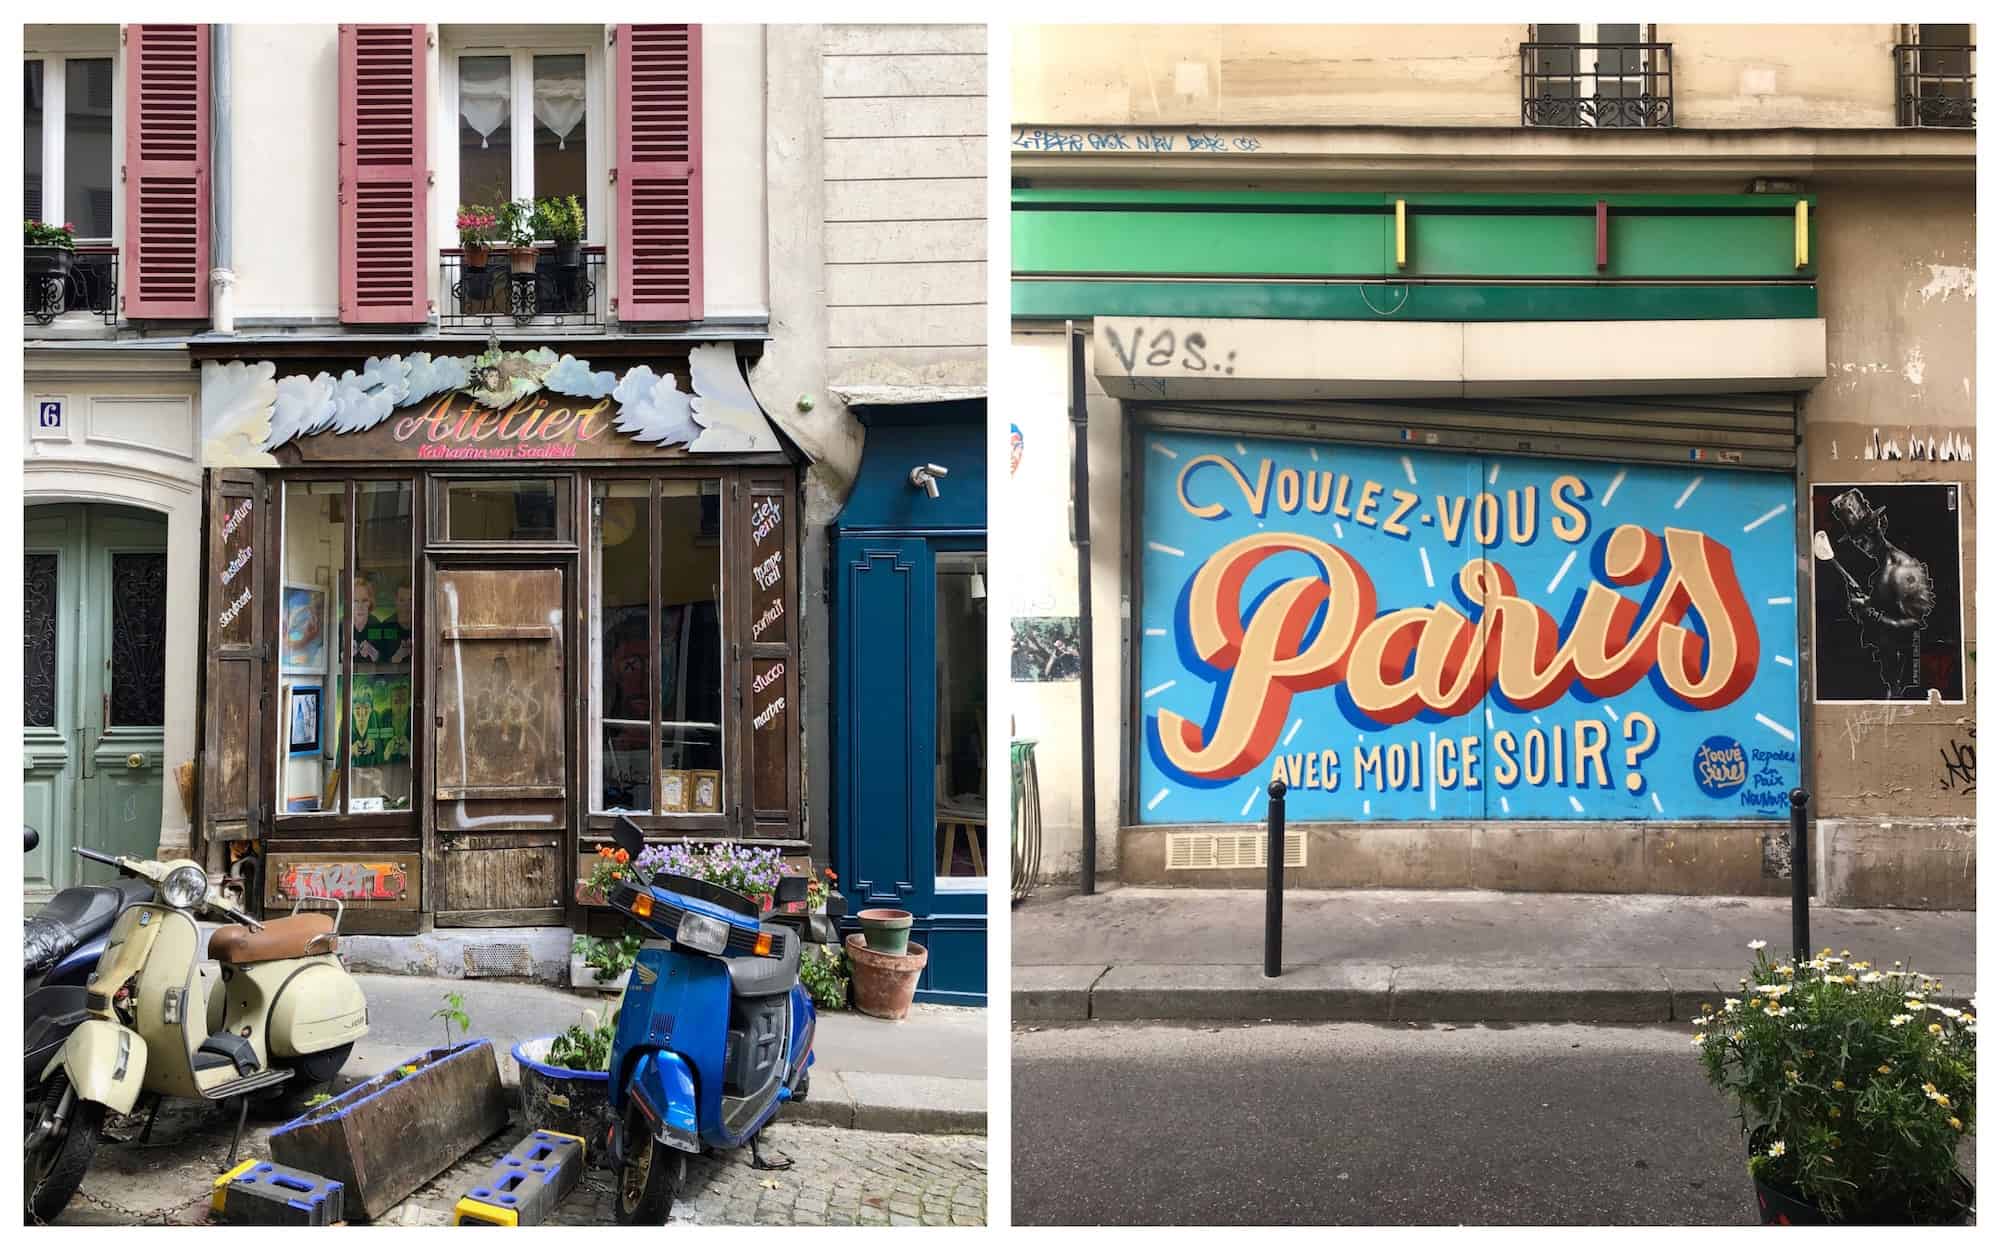 Living in Paris is all about spotting charming bars, restaurants and shops in the city, like this one with an old wood facade (left). Street art by the Toqué Frères on a shop front (right). 